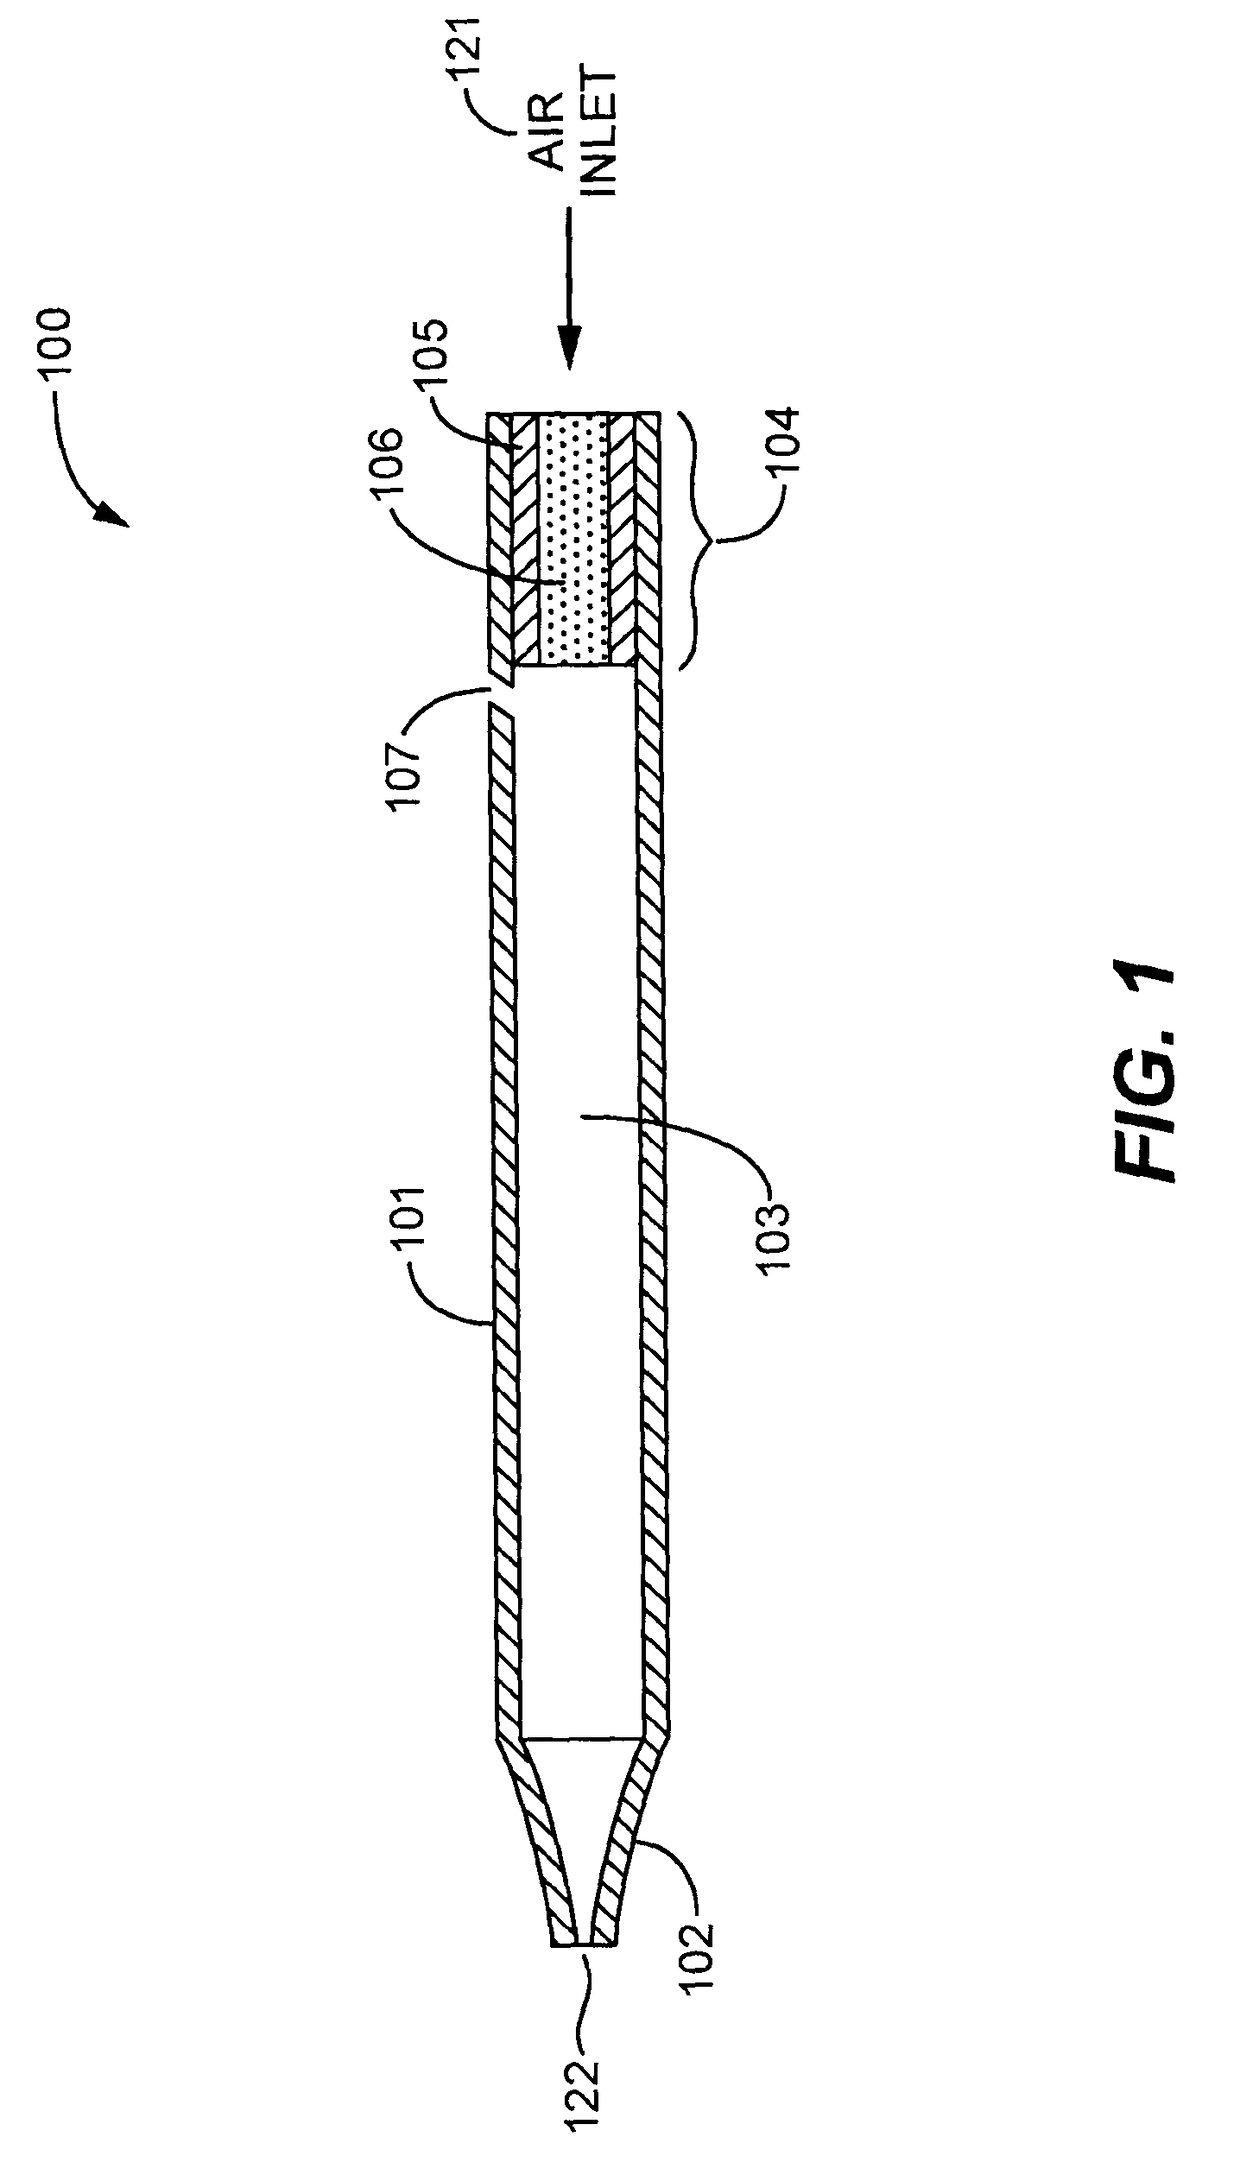 Cartridge for use with a vaporizer device